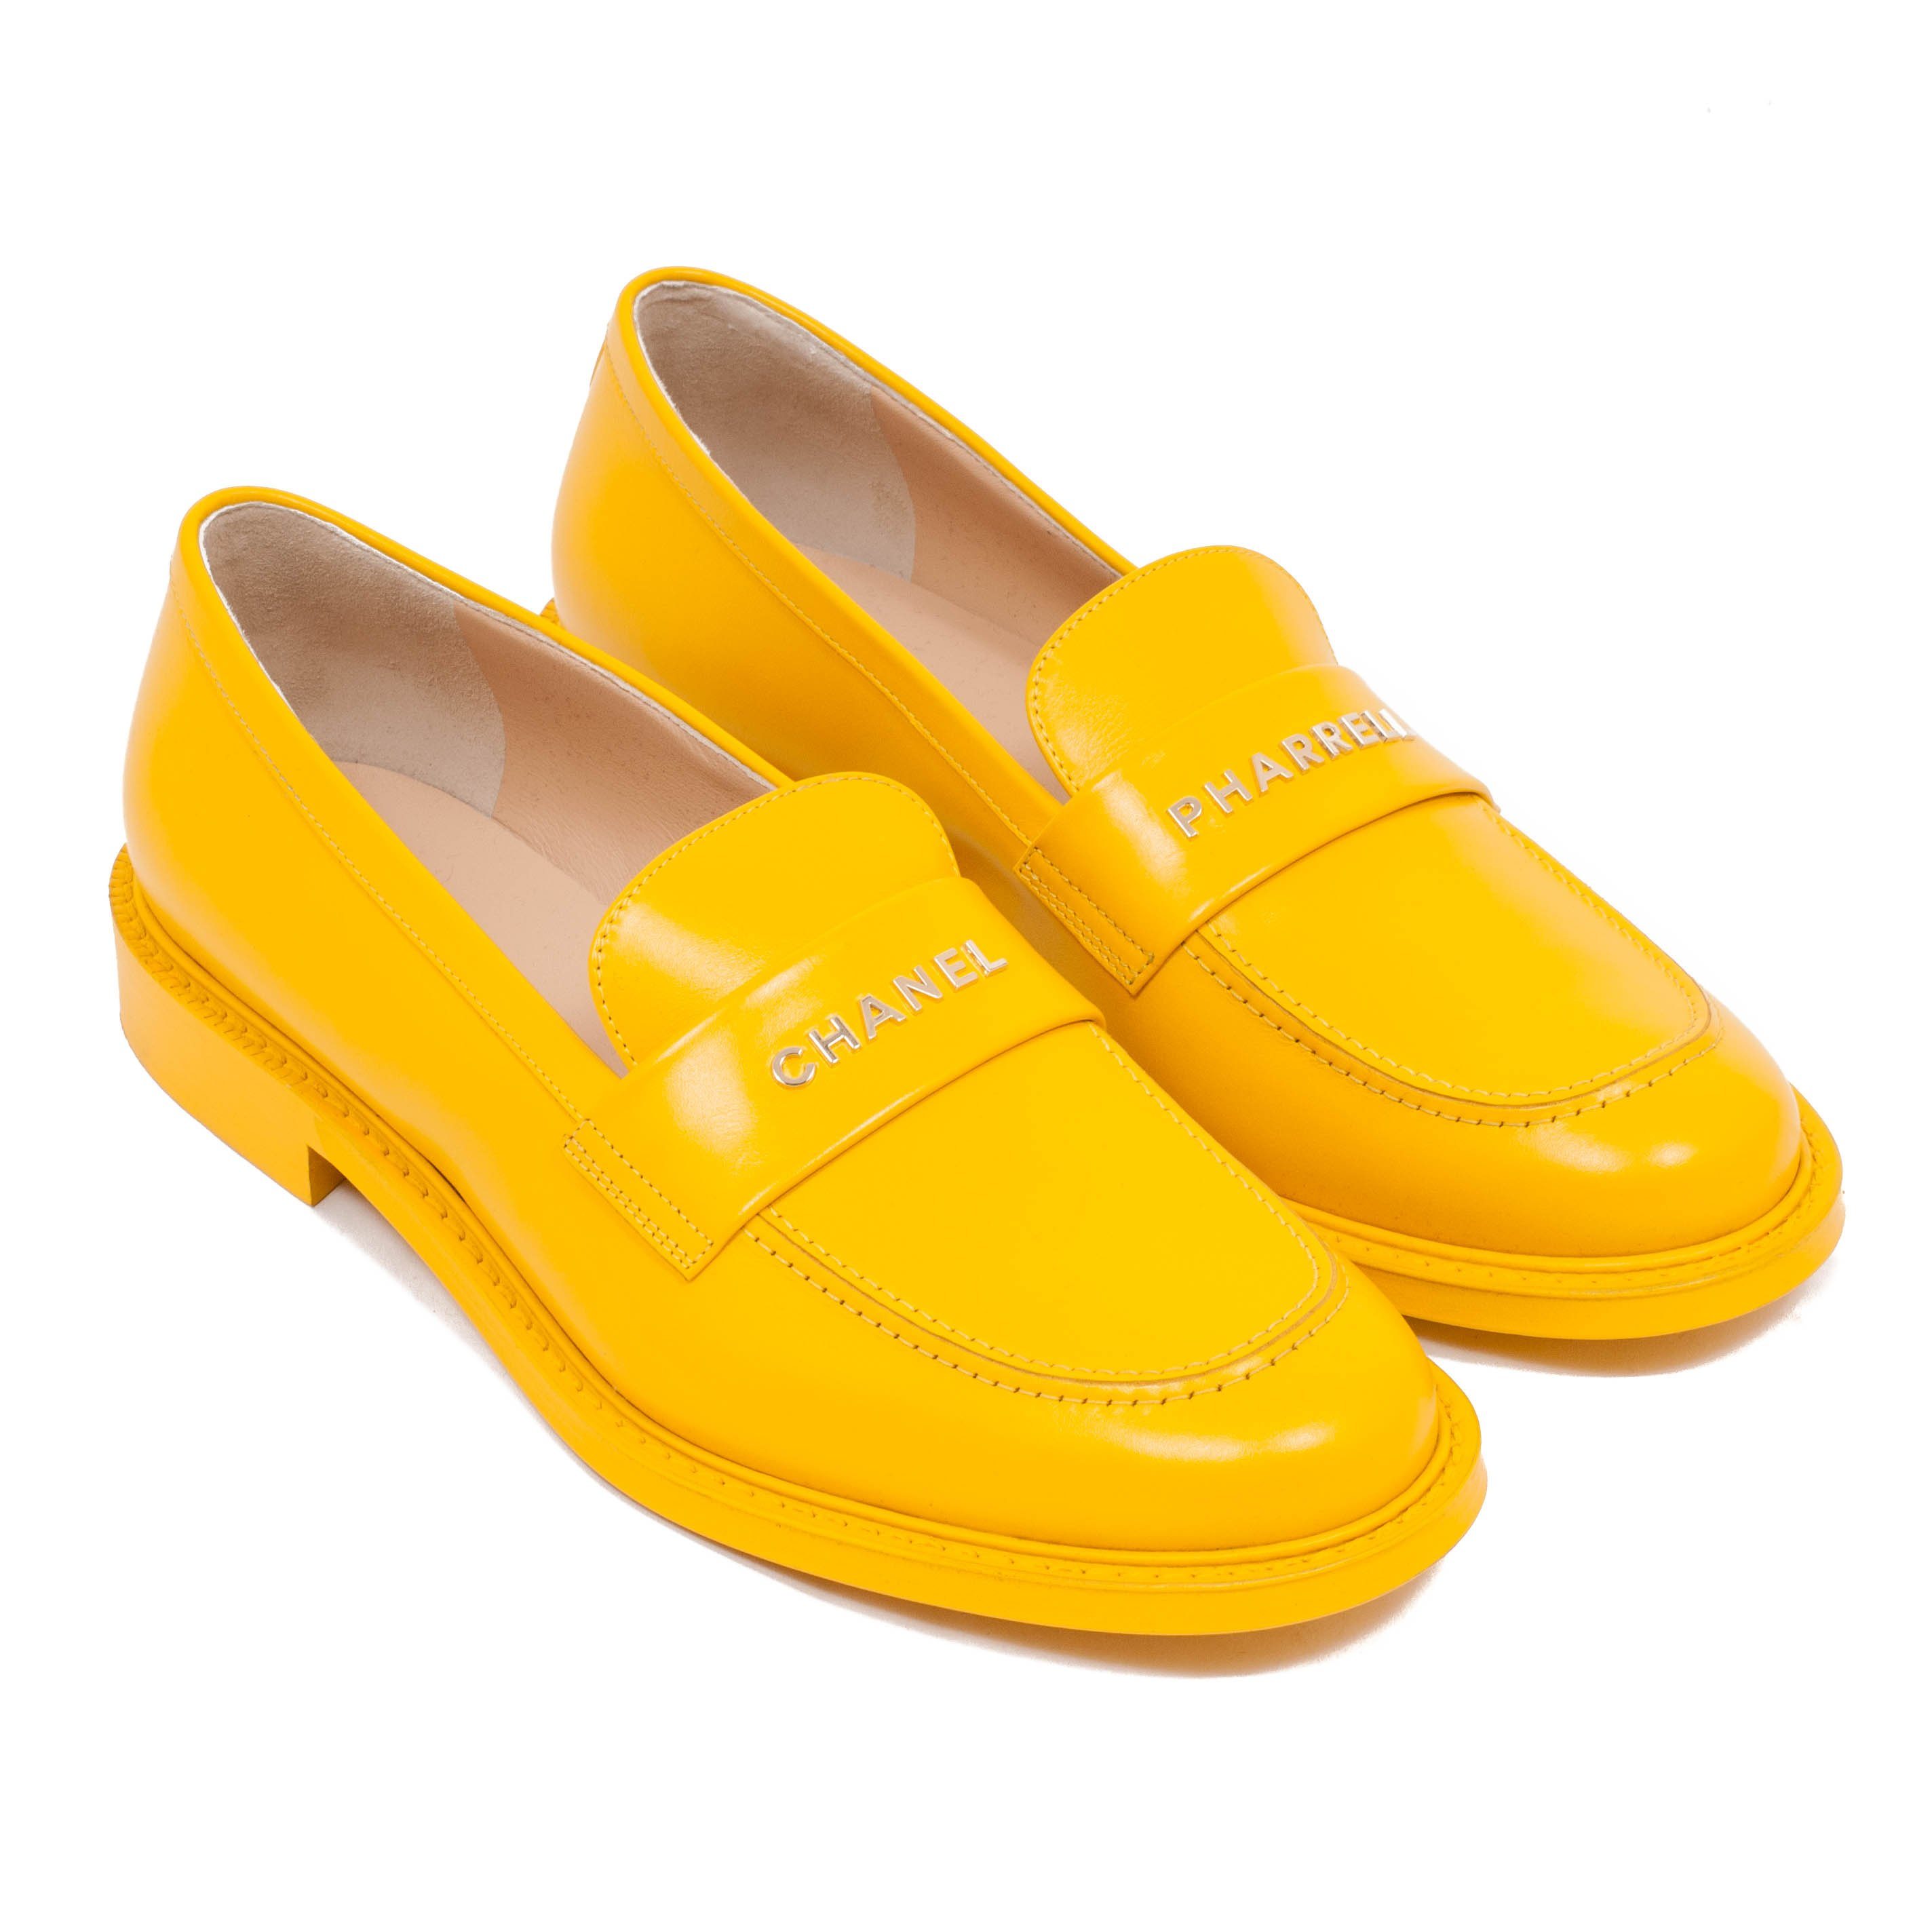 Chanel loafers - 121 Brand Shop